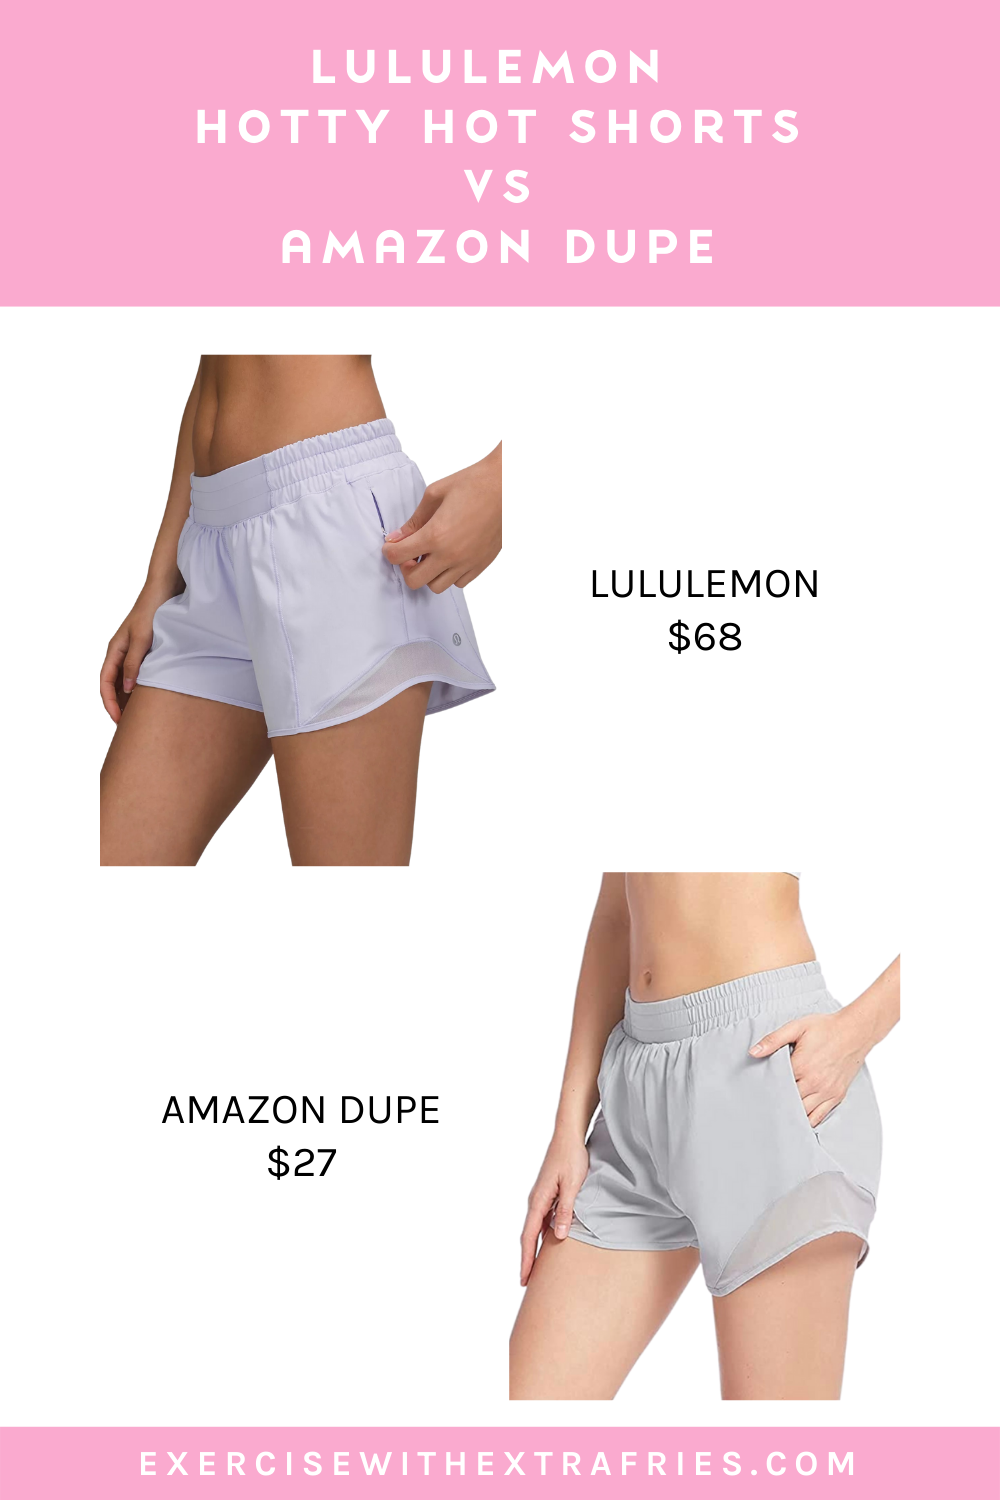 https://www.exercisewithextrafries.com/wp-content/uploads/2022/09/Lululemon-Hotty-Hot-Shorts-Dupe-2.png